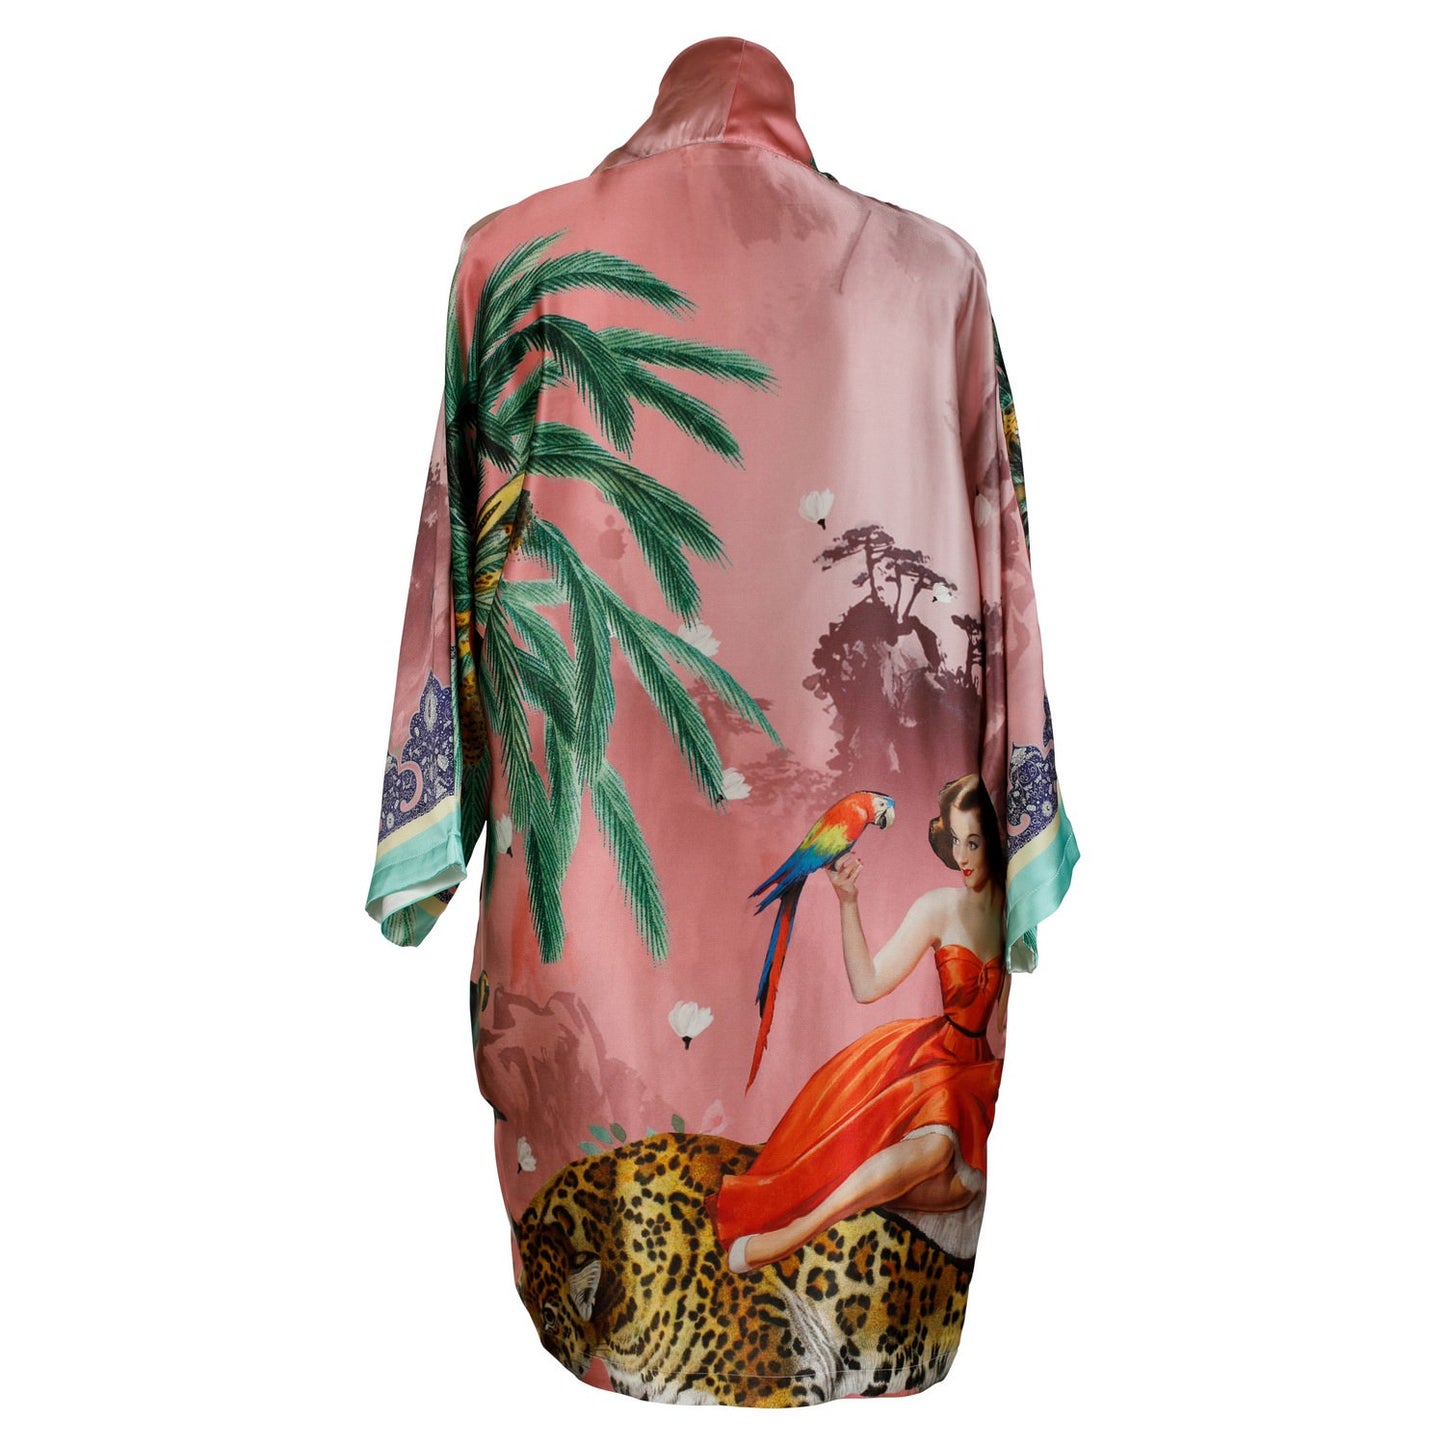 Back view of a luxury 100% silk Kimono in a maximalist vintage pink design